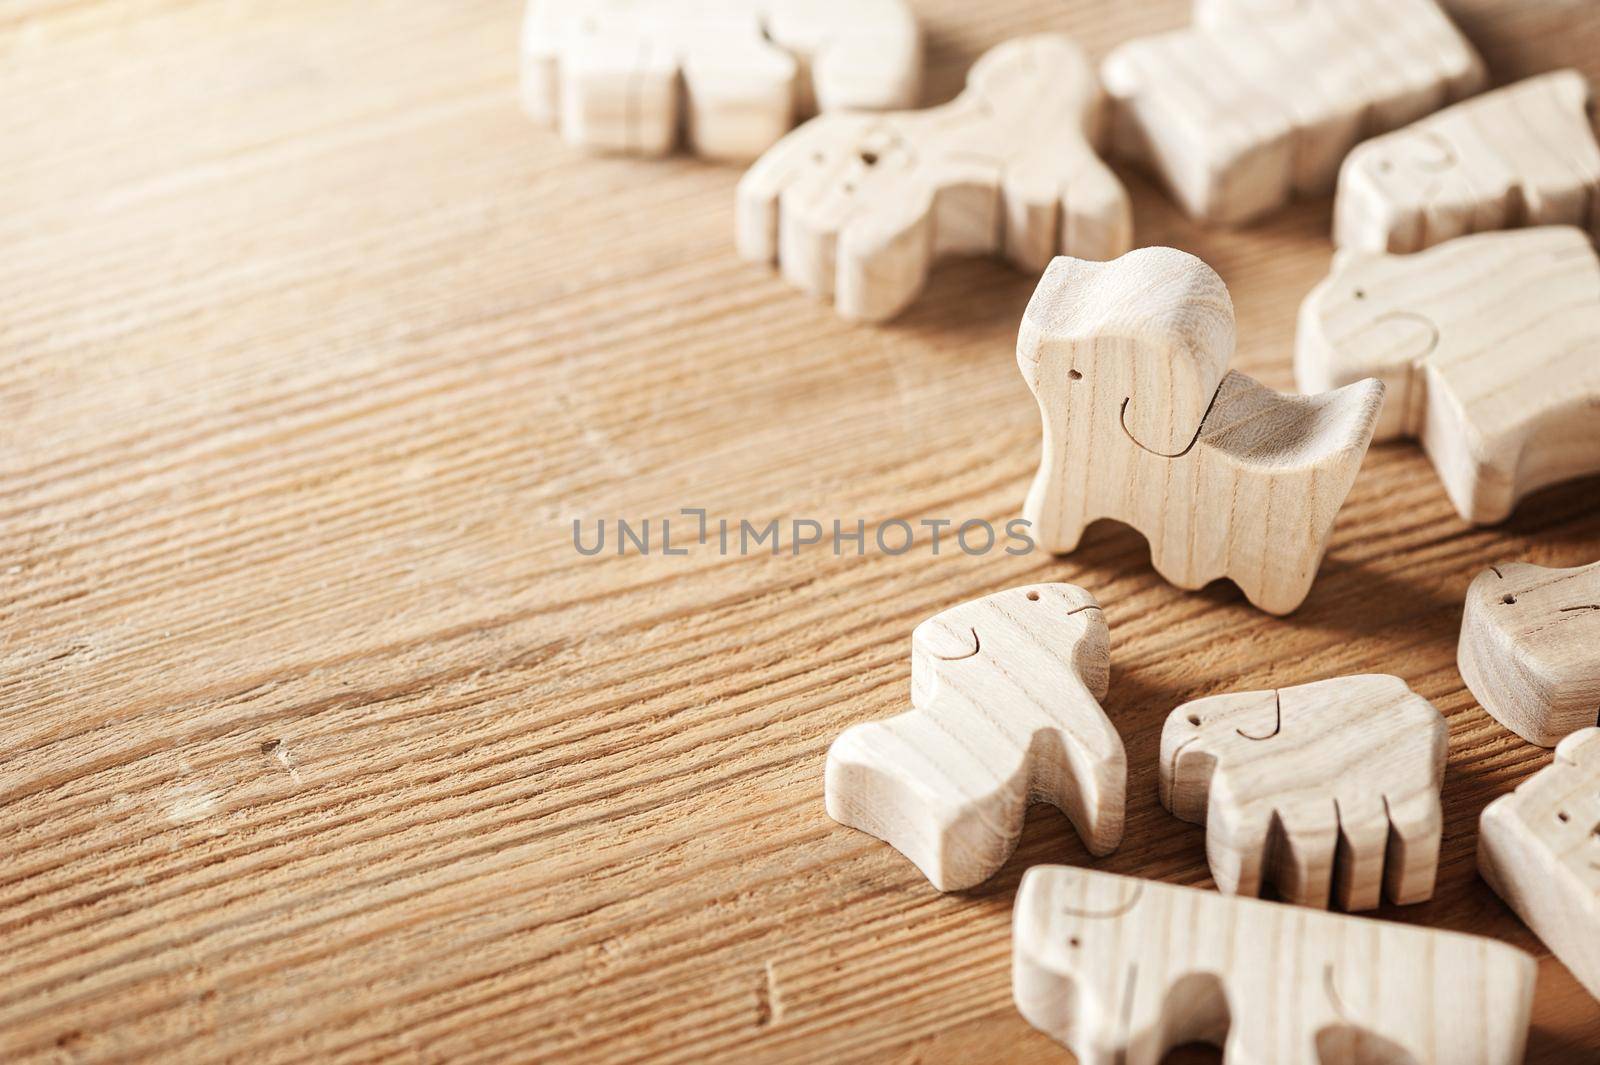 toys background, cute wooden toy animal on wood board, tiny toys and shallow depth of field